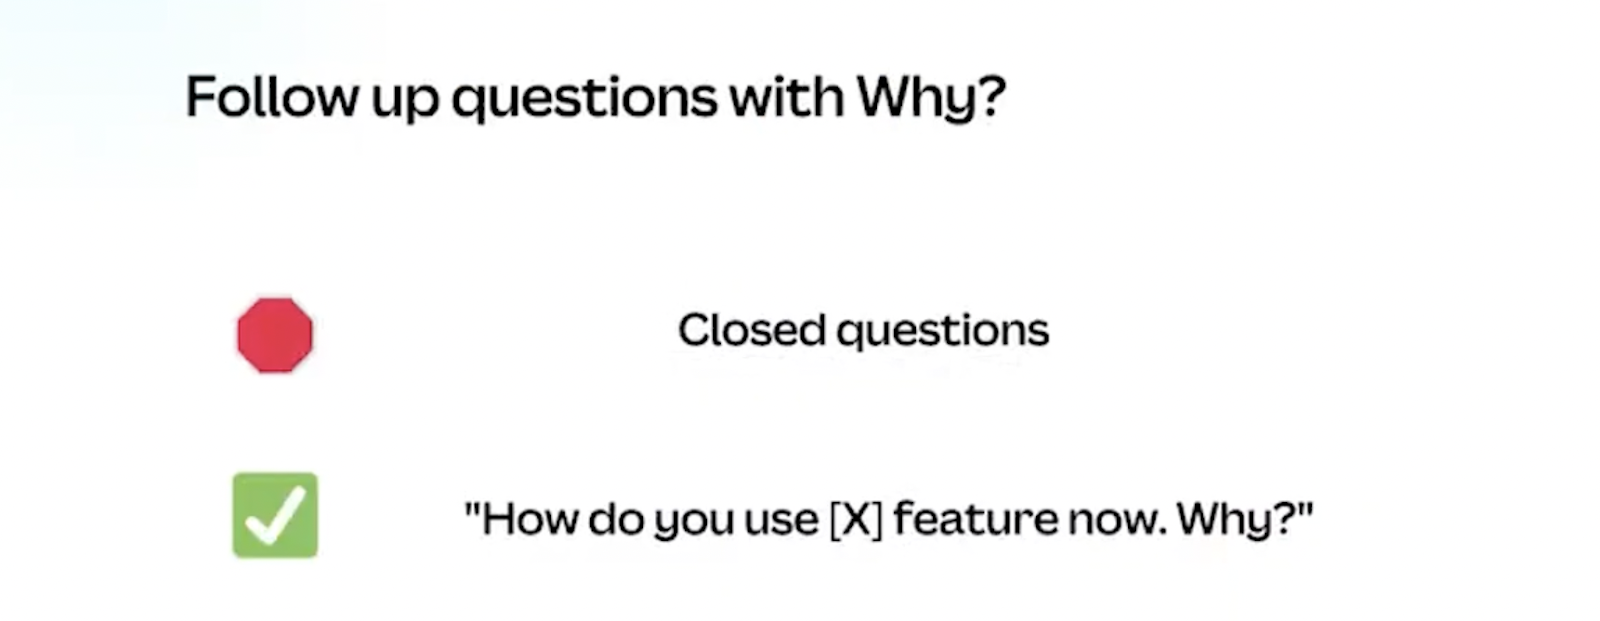 Follow up questions with why. Don't ask closed questions. Ask "How do you use [x] feature now. Why?"